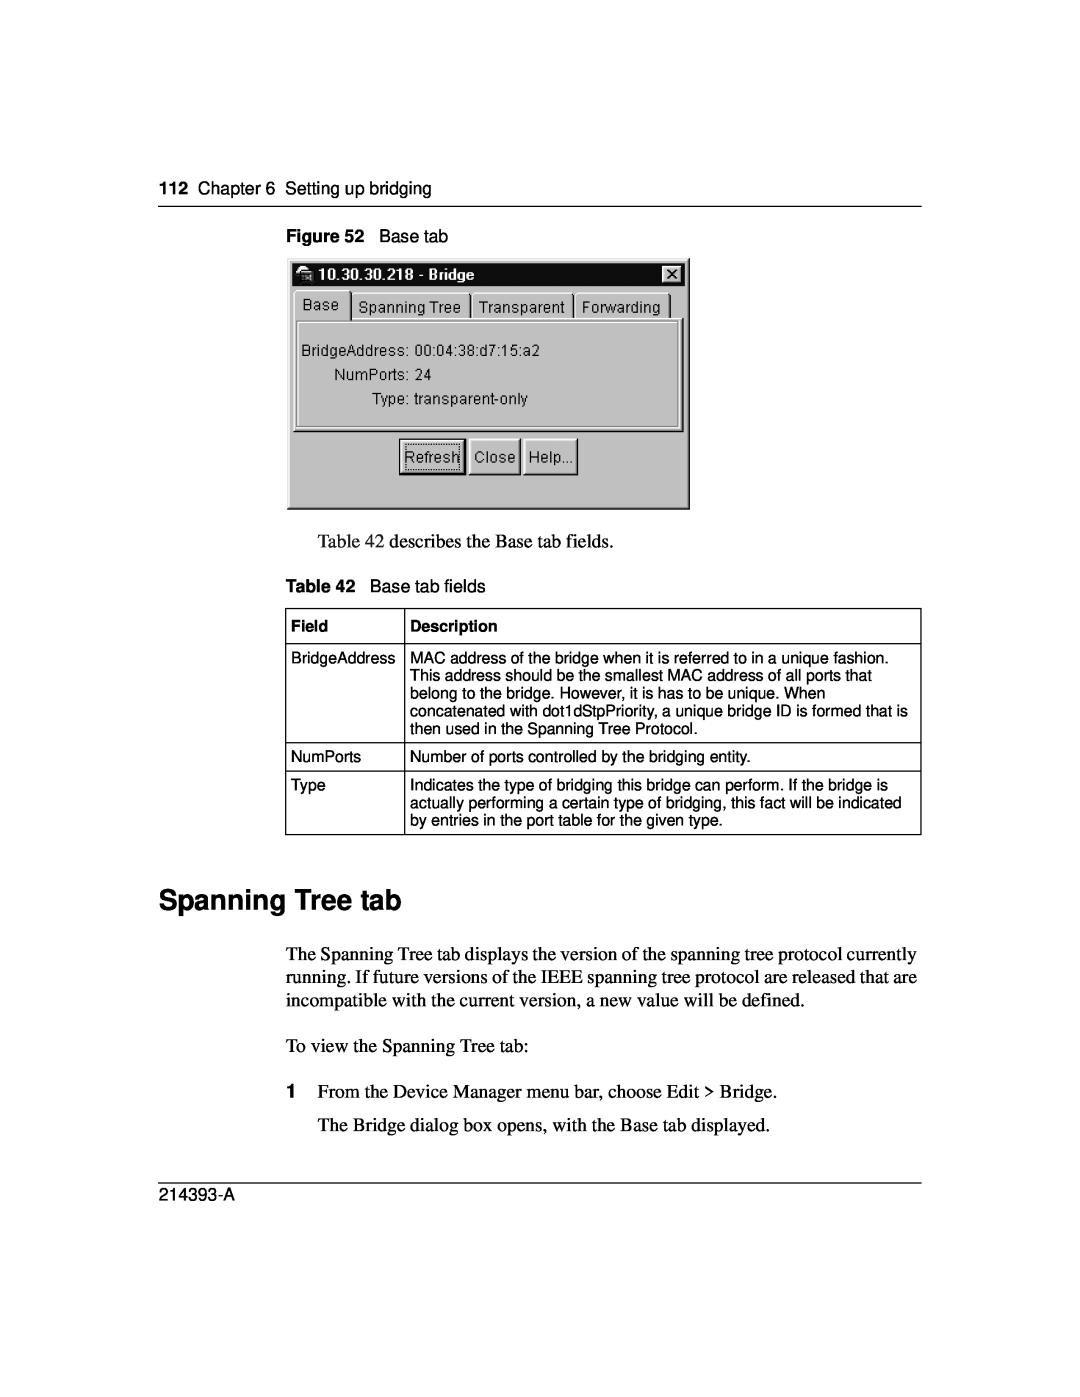 Nortel Networks 214393-A manual Spanning Tree tab 